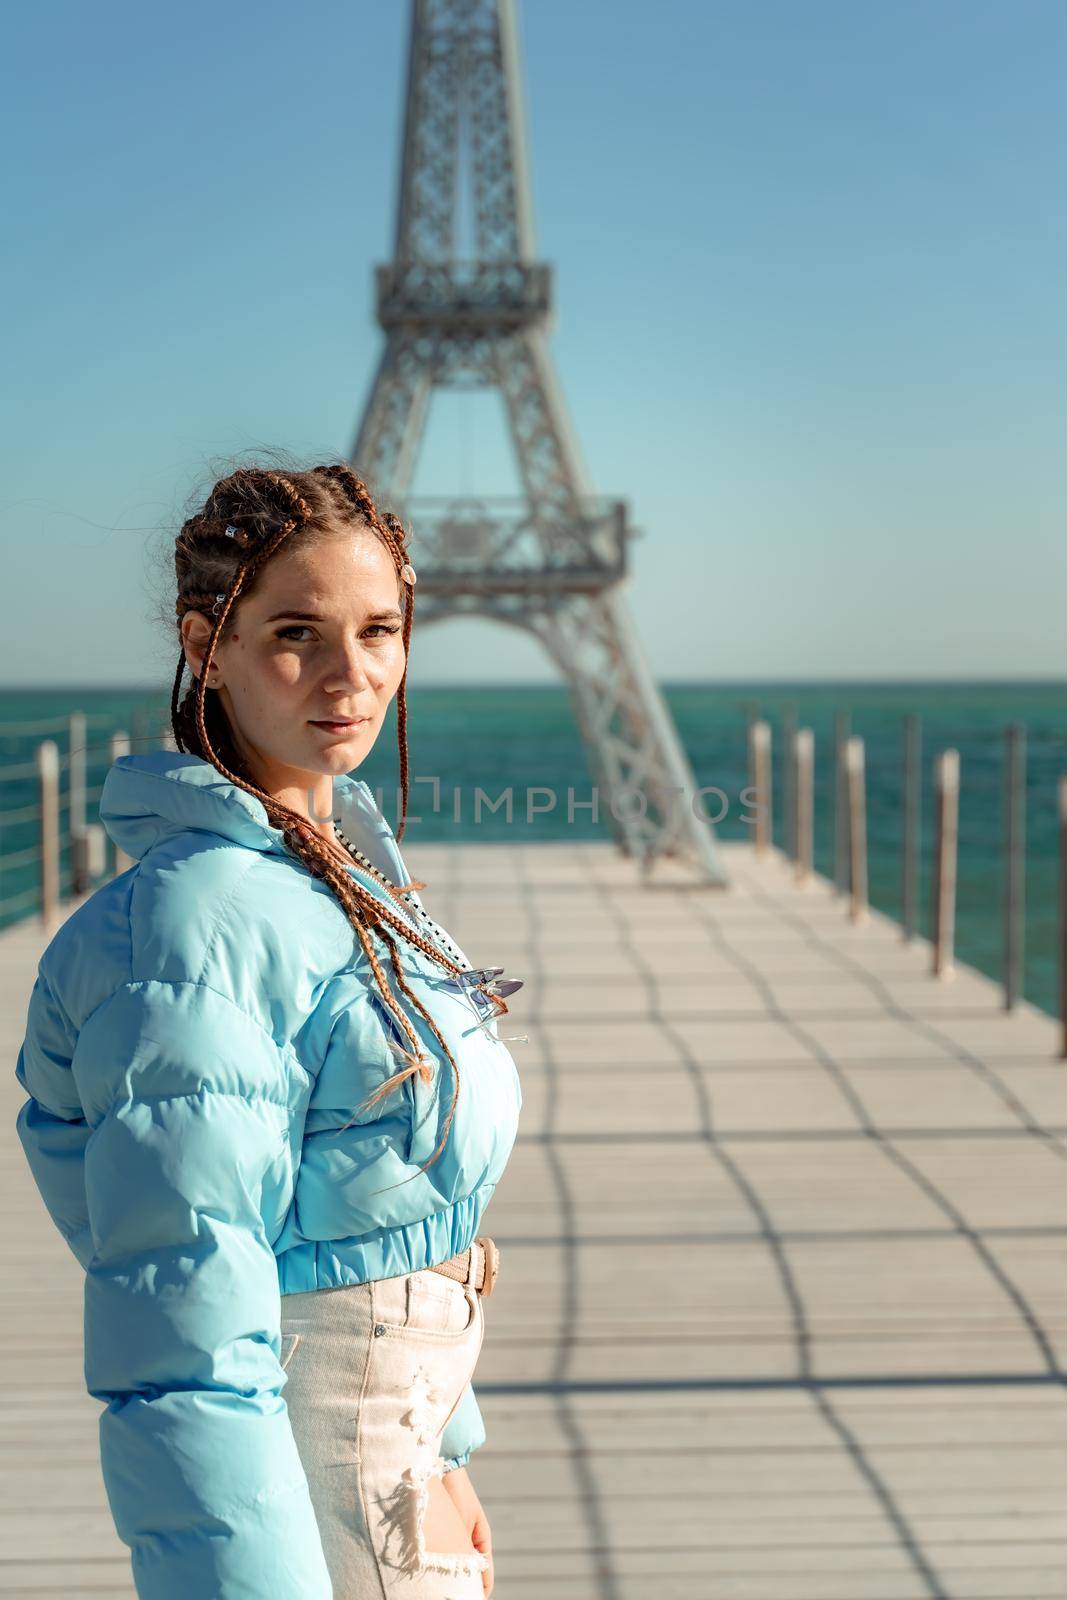 Large model of the Eiffel Tower on the beach. A woman walks along the pier towards the tower, wearing a blue jacket and white jeans